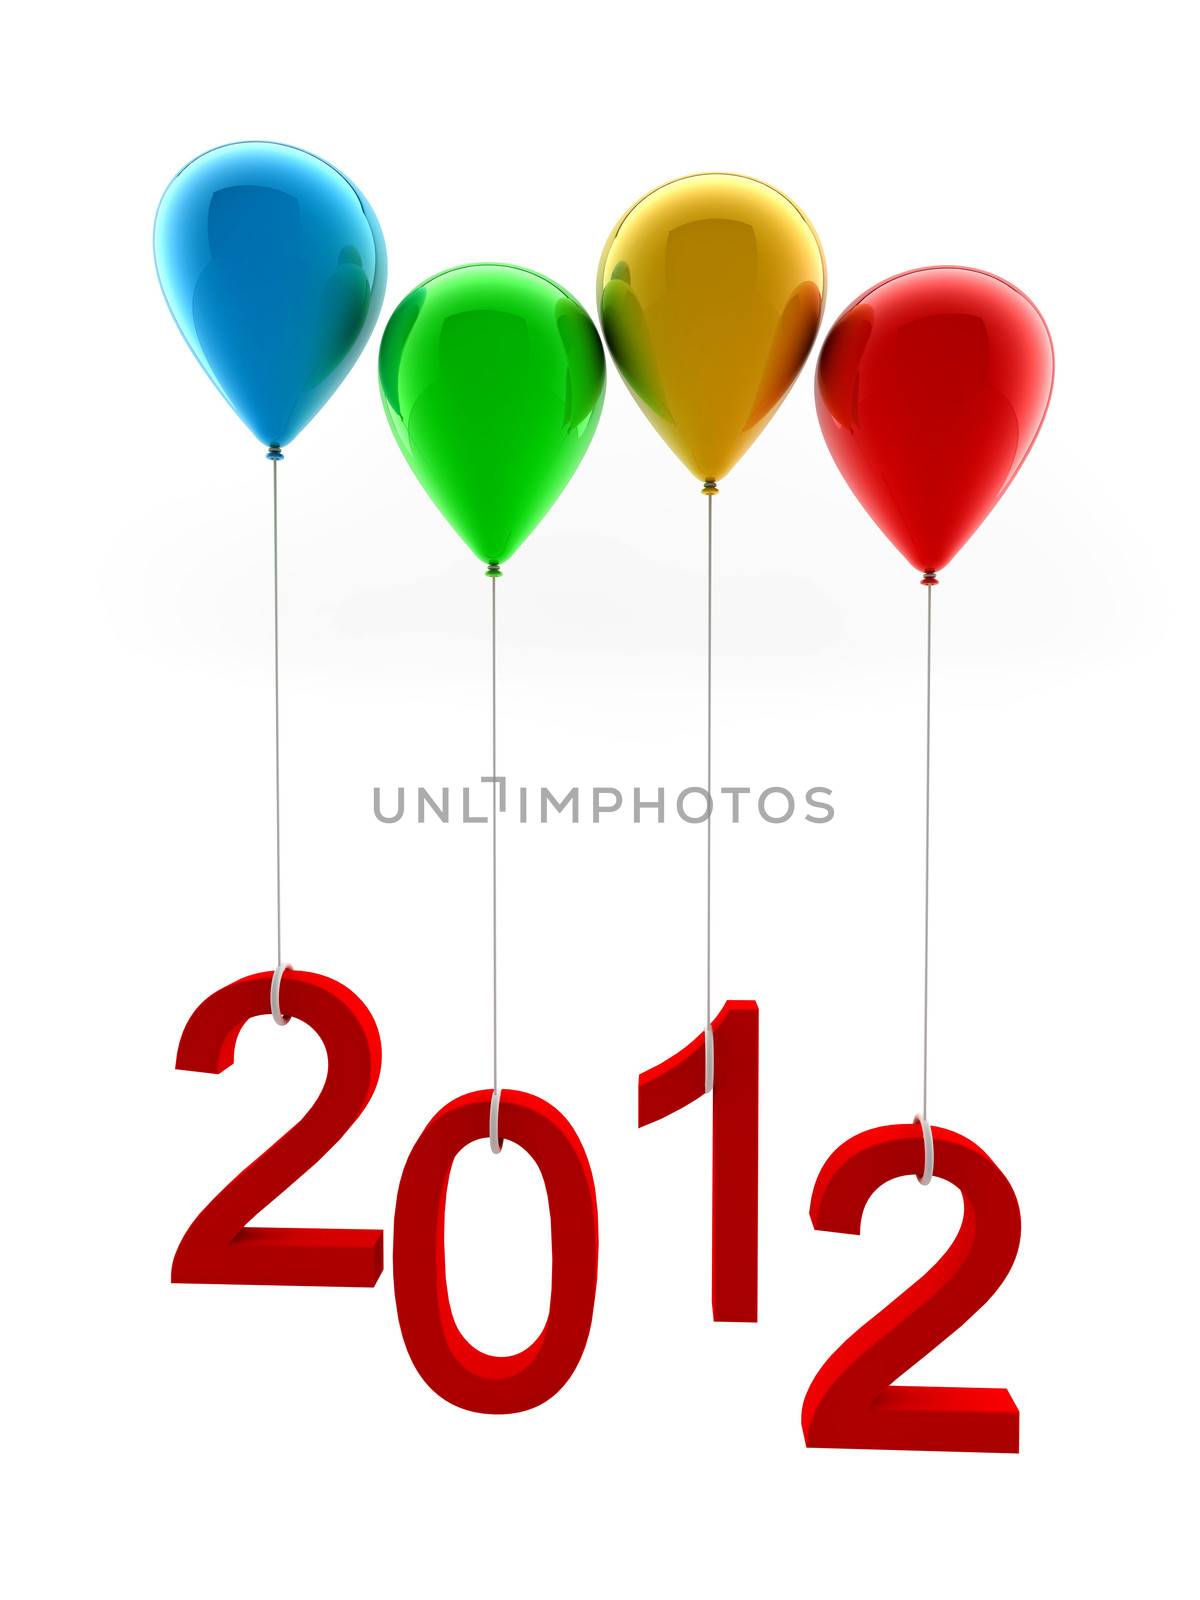 A 2012 red text fly with colored balloons